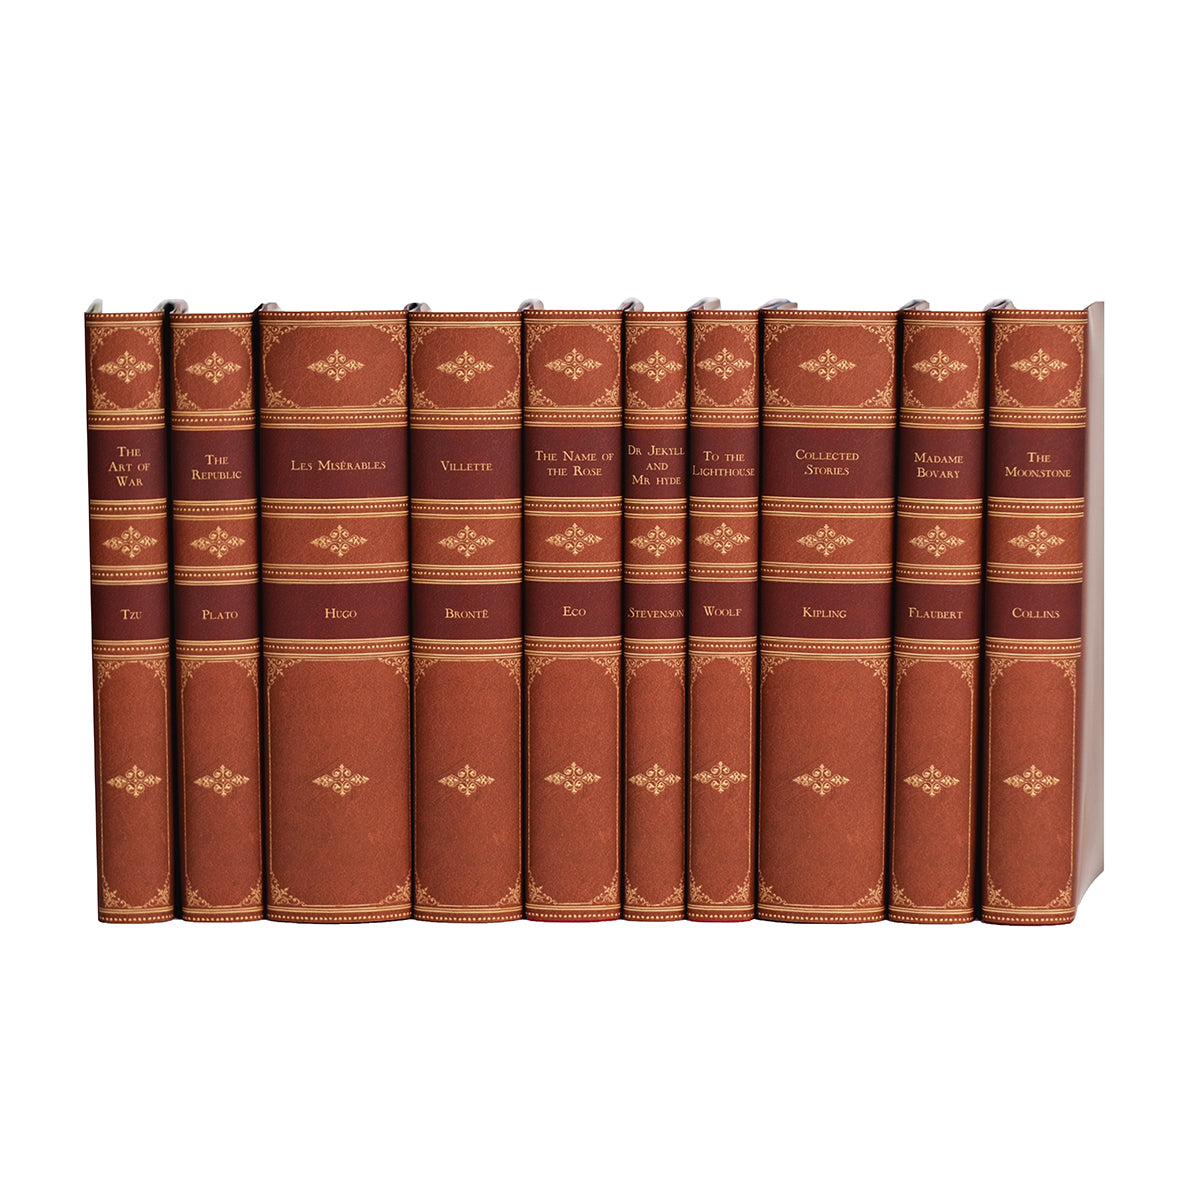 Everyman's Library Classics with Antique Leather-Style Jackets in Sets of 10